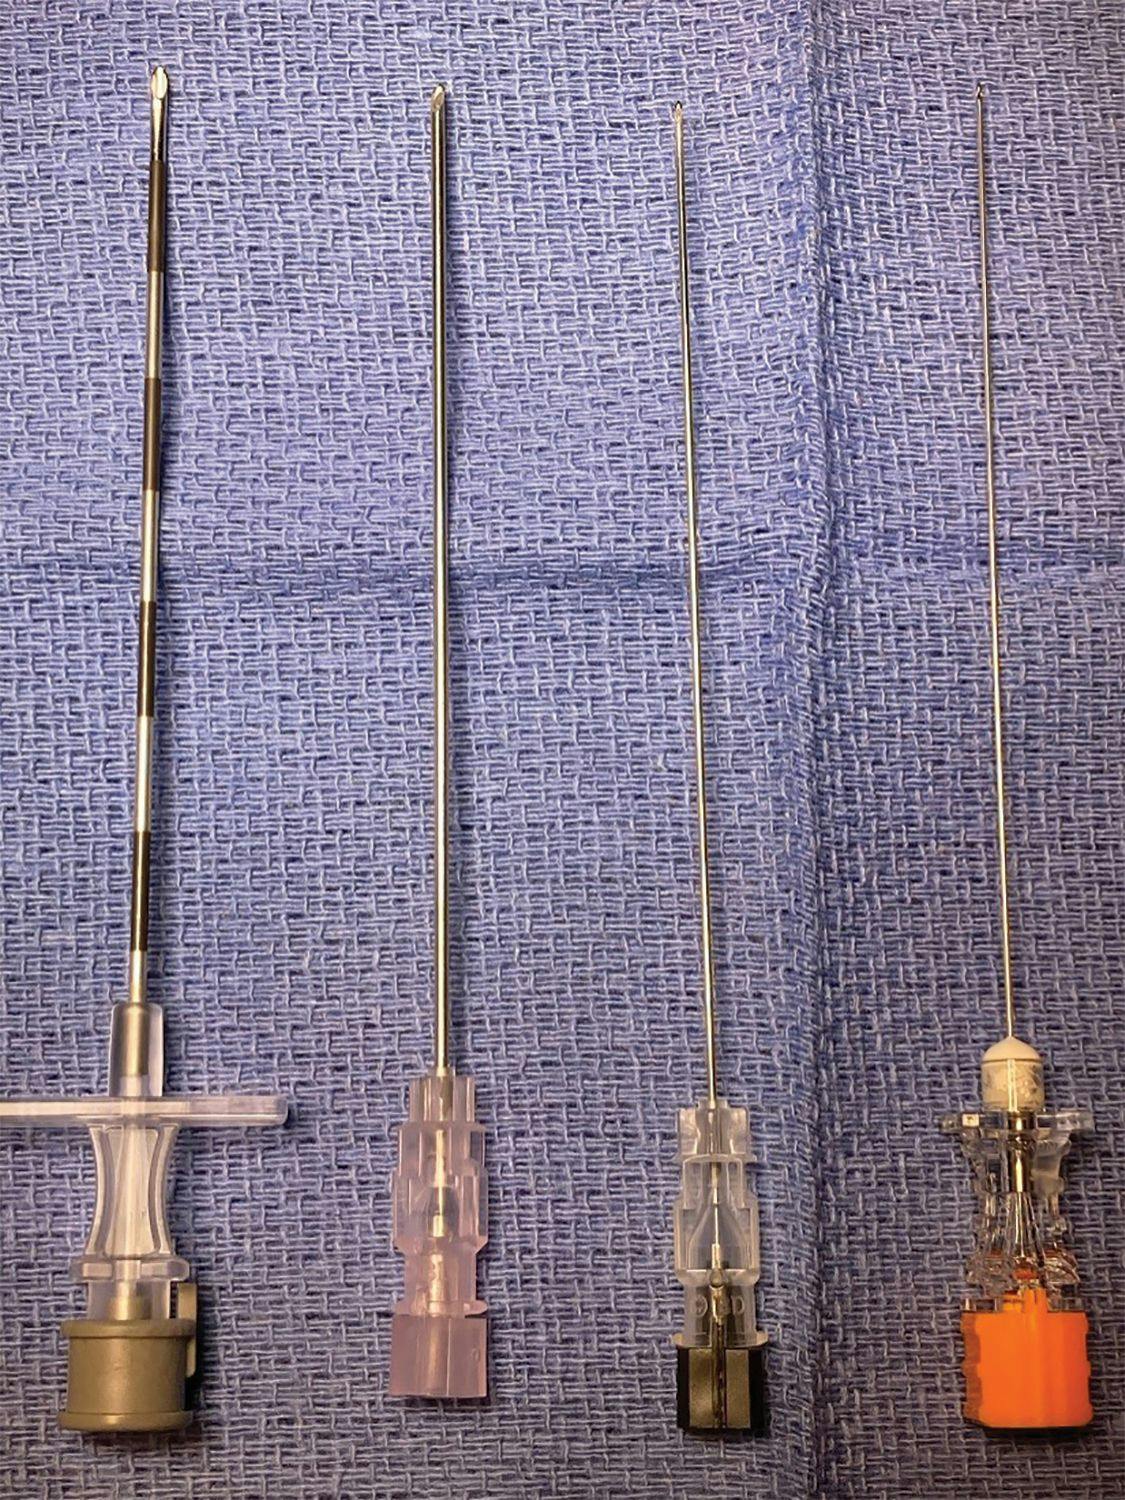 Neuraxial needles of different sizes